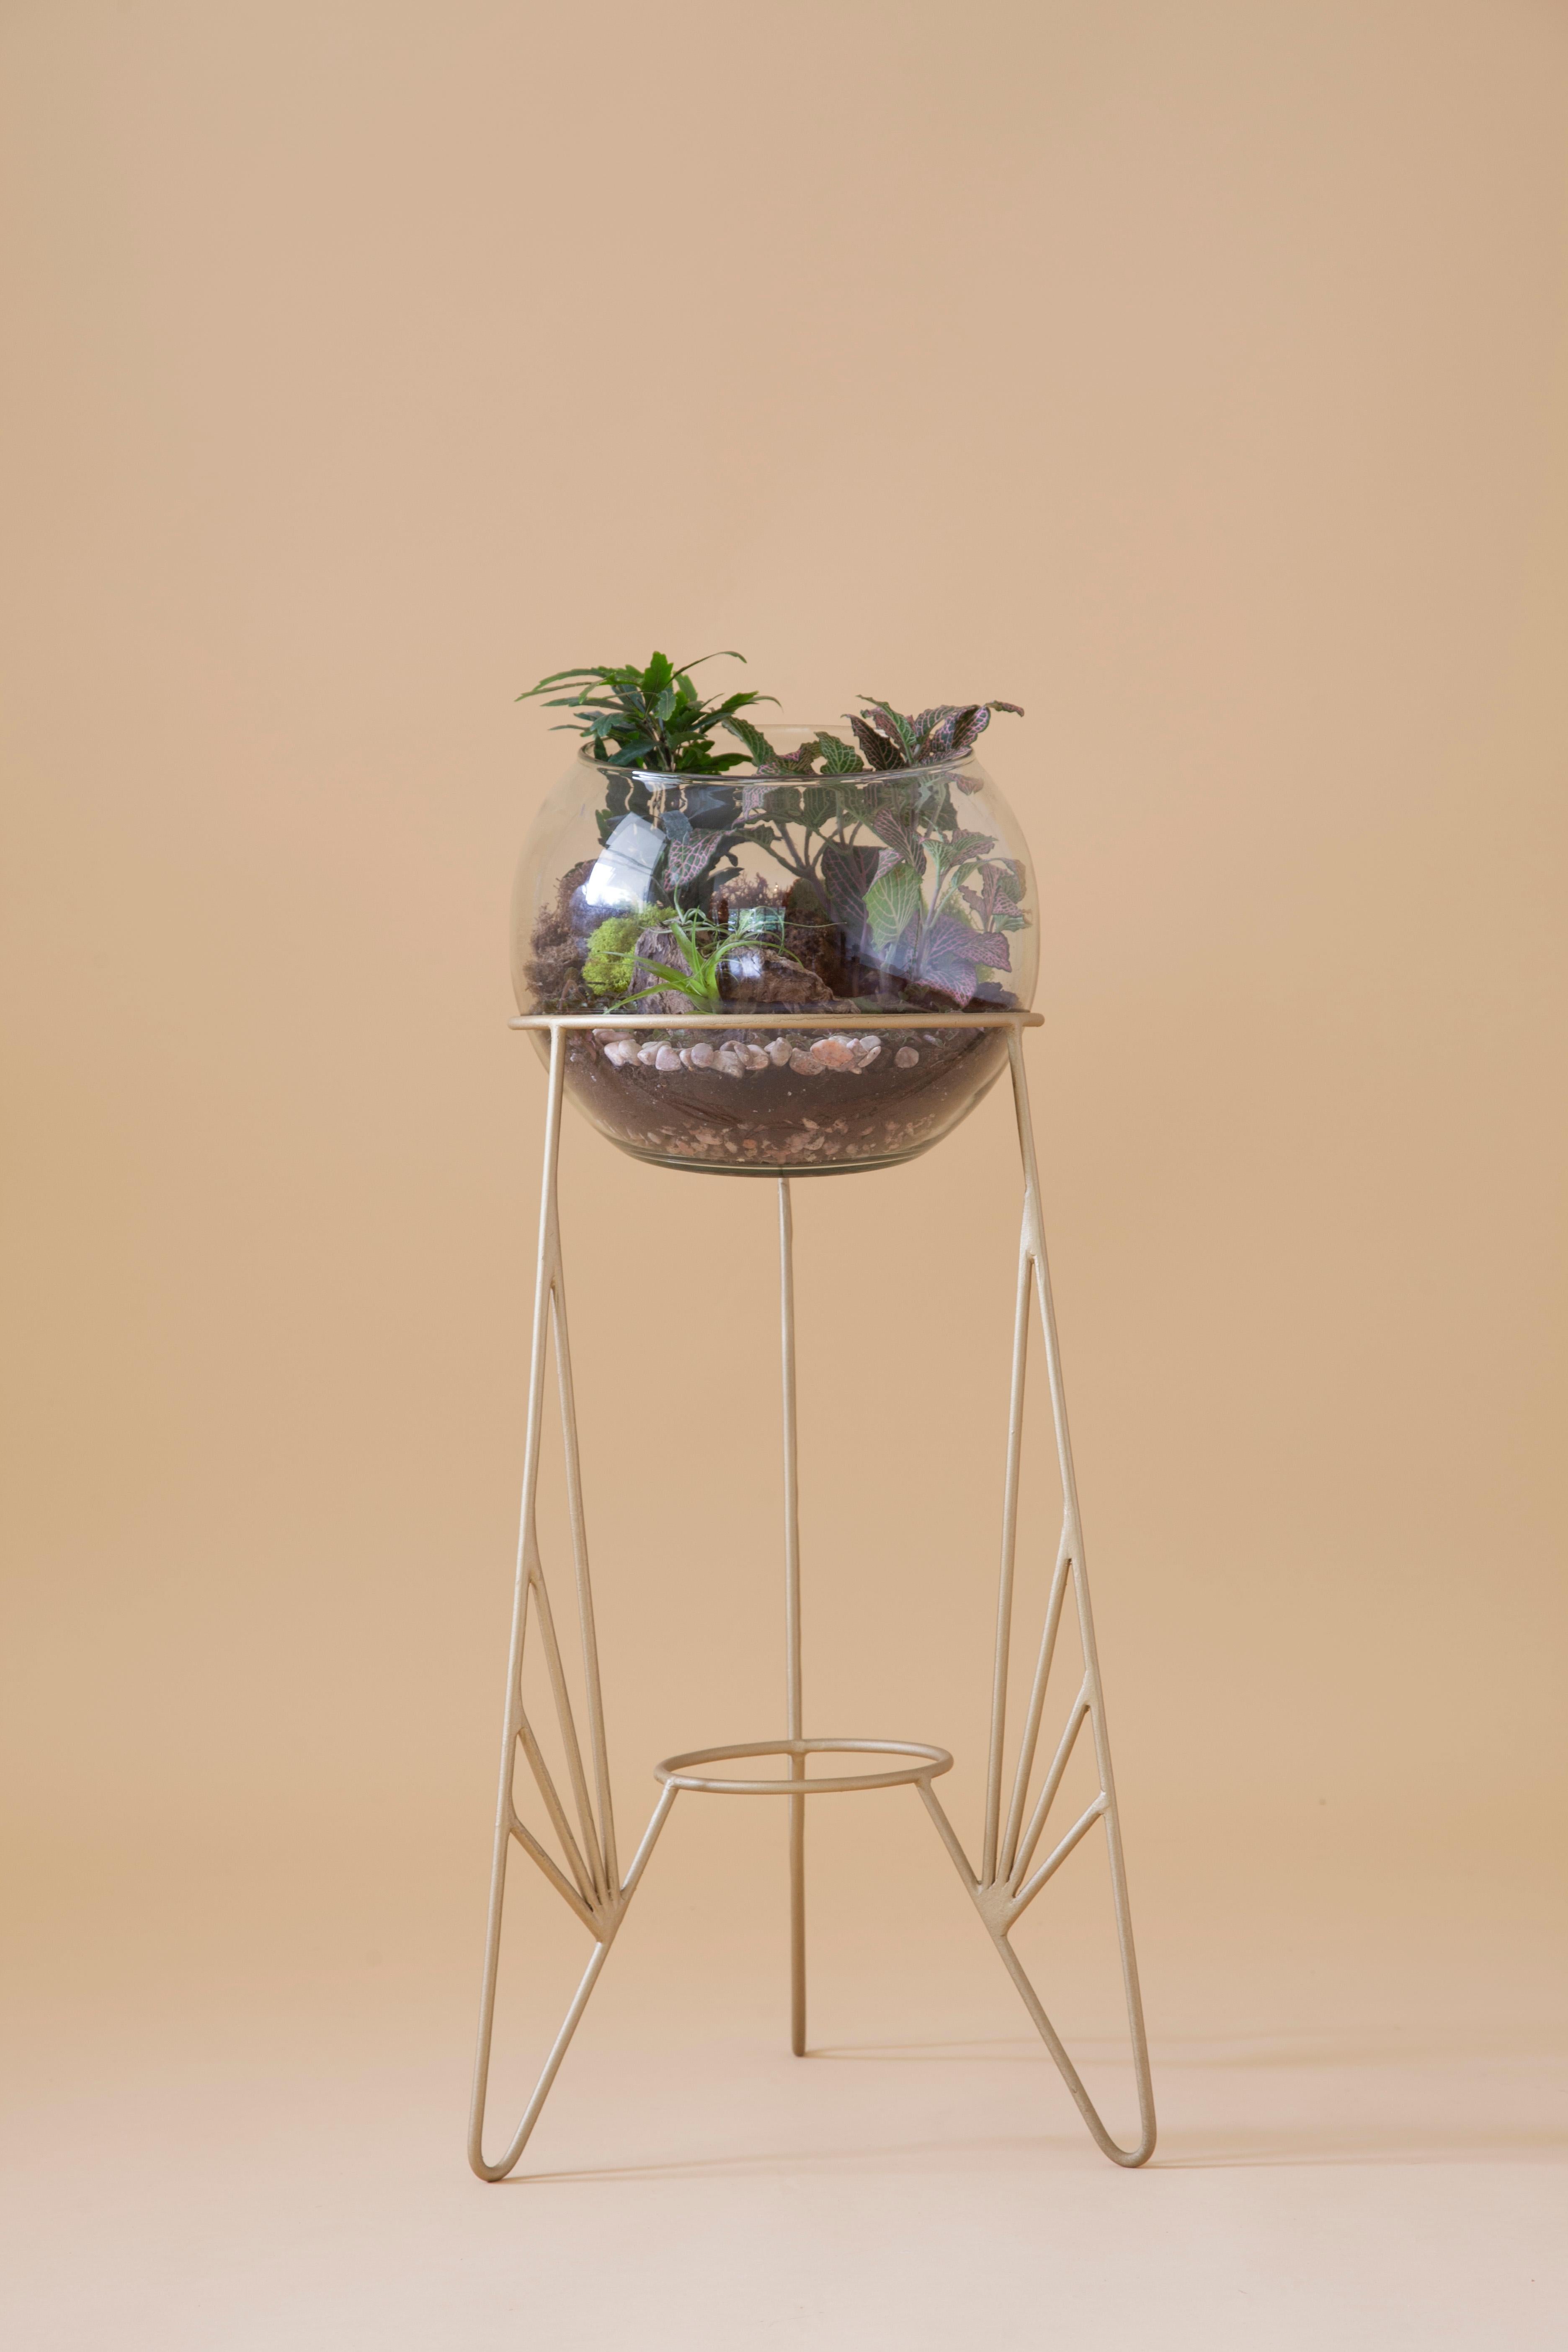 Aurea plant stand 5 by Sofia Alvarado
Limited edition 1 of 10 (one in stock)
Materials: Metal and woods or golden, white or black. 
 include glass ball jar
Dimensions: H 70 x W 30 cm

FI is an ornamental artist who embodies the creative